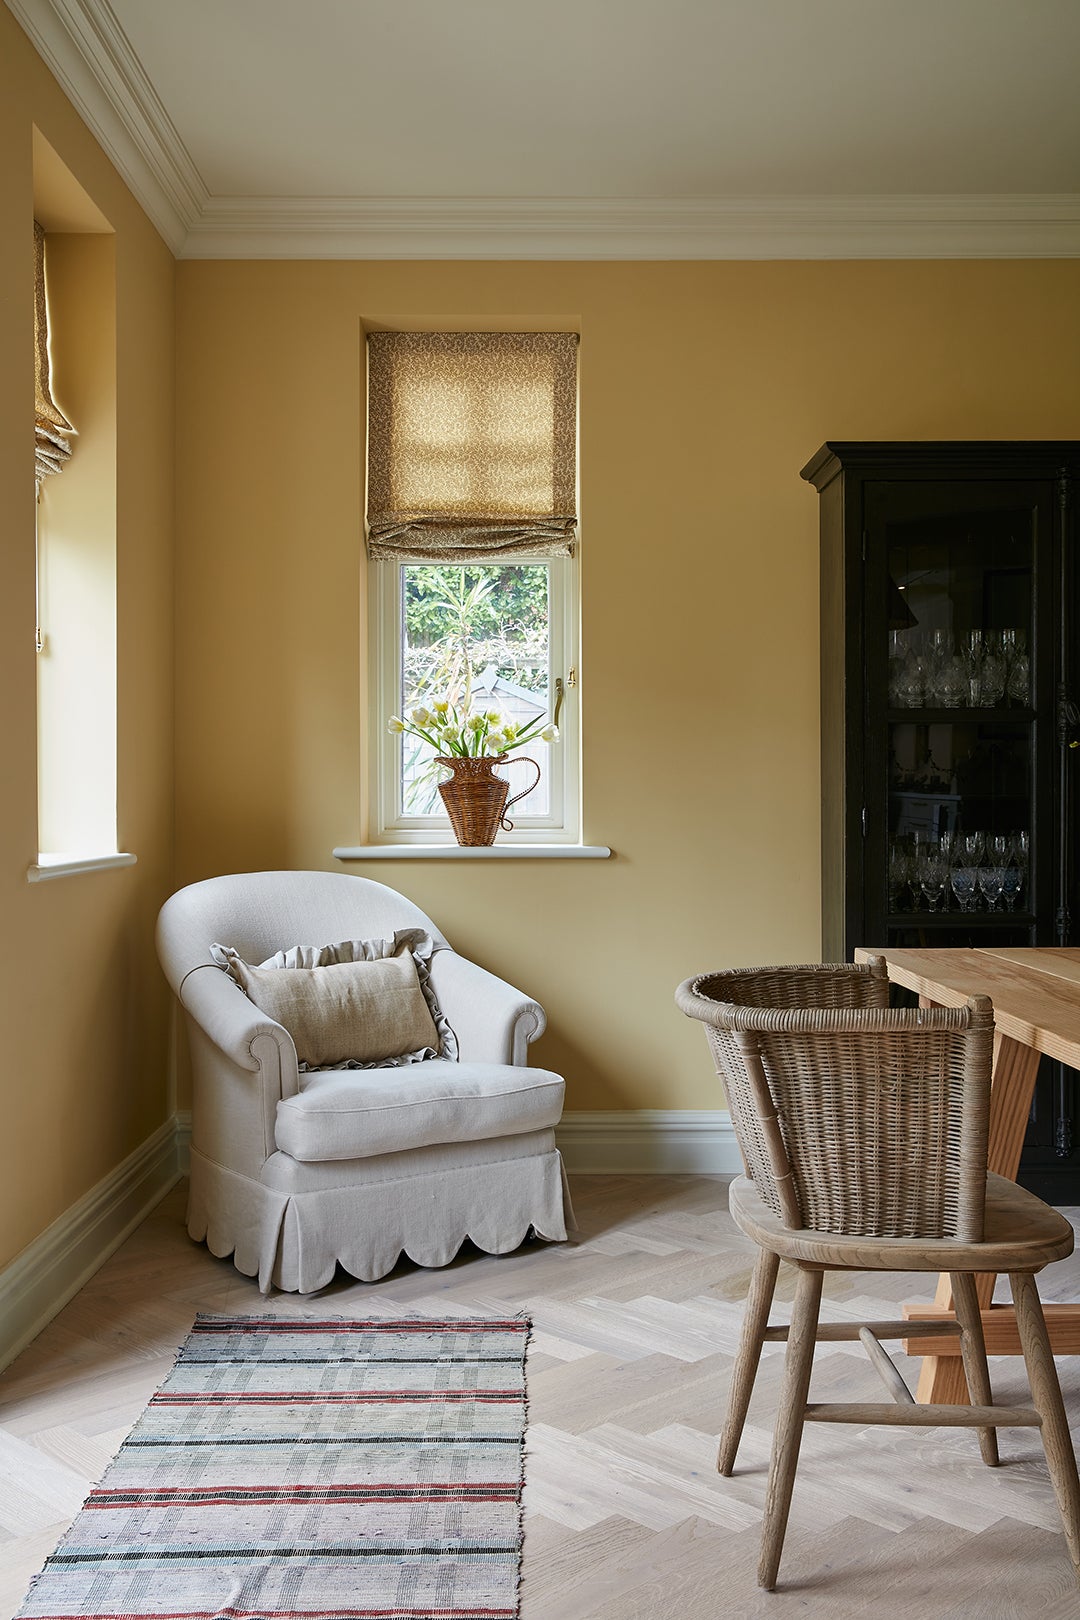 armchair in a dining room corner